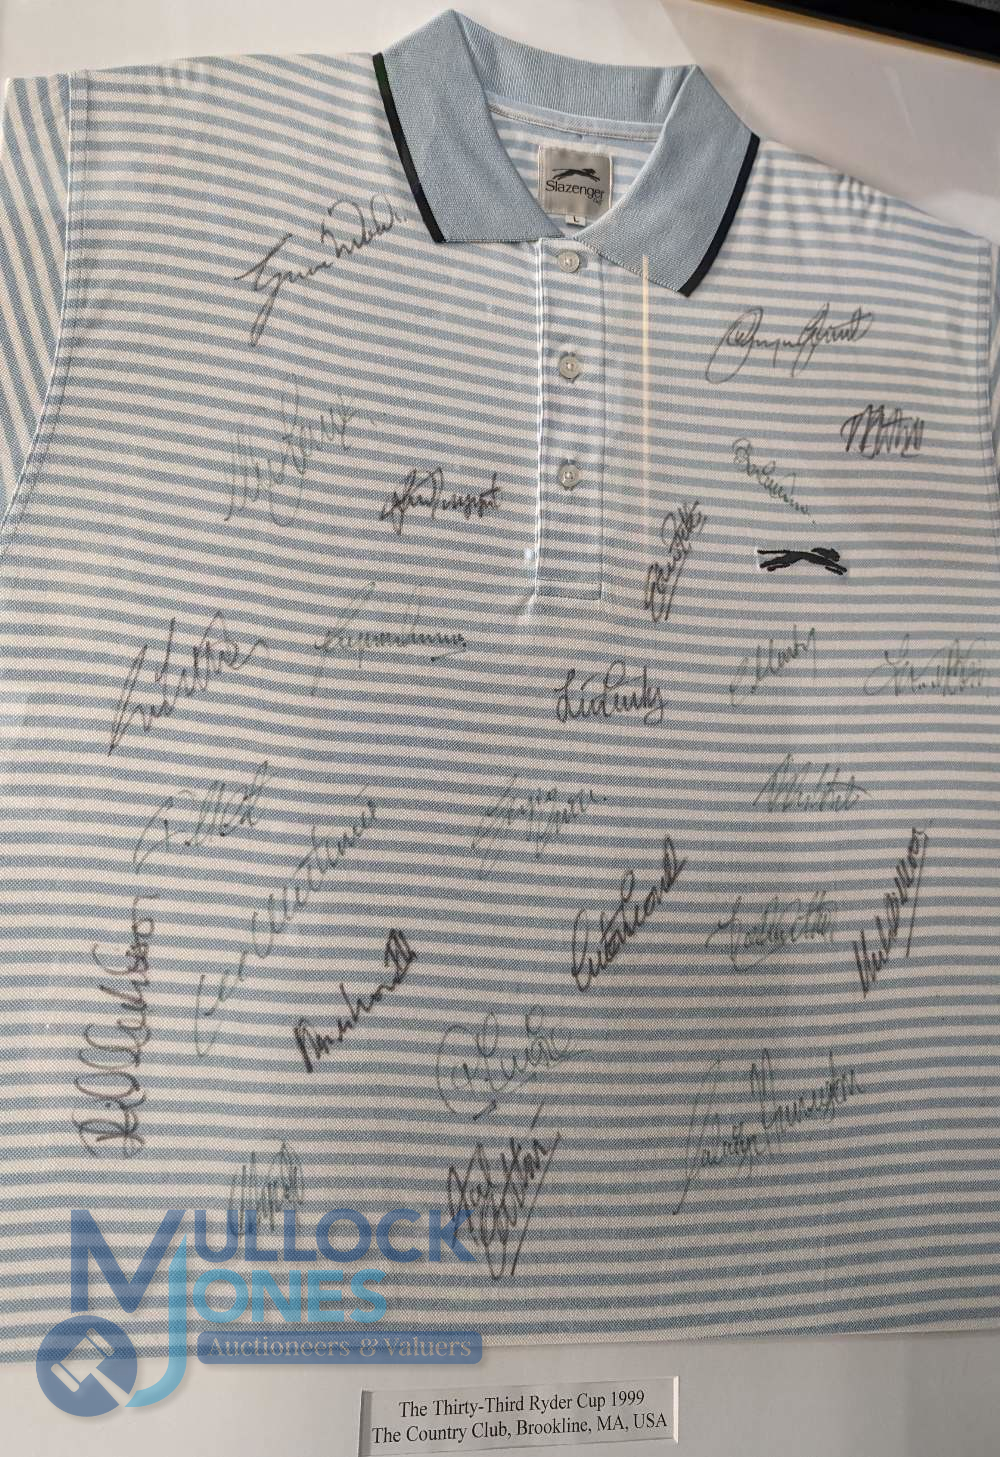 Golf Autographs - multi-signed 1999 Ryder Cup Golf framed T-Shirt - featuring the European and - Image 3 of 3